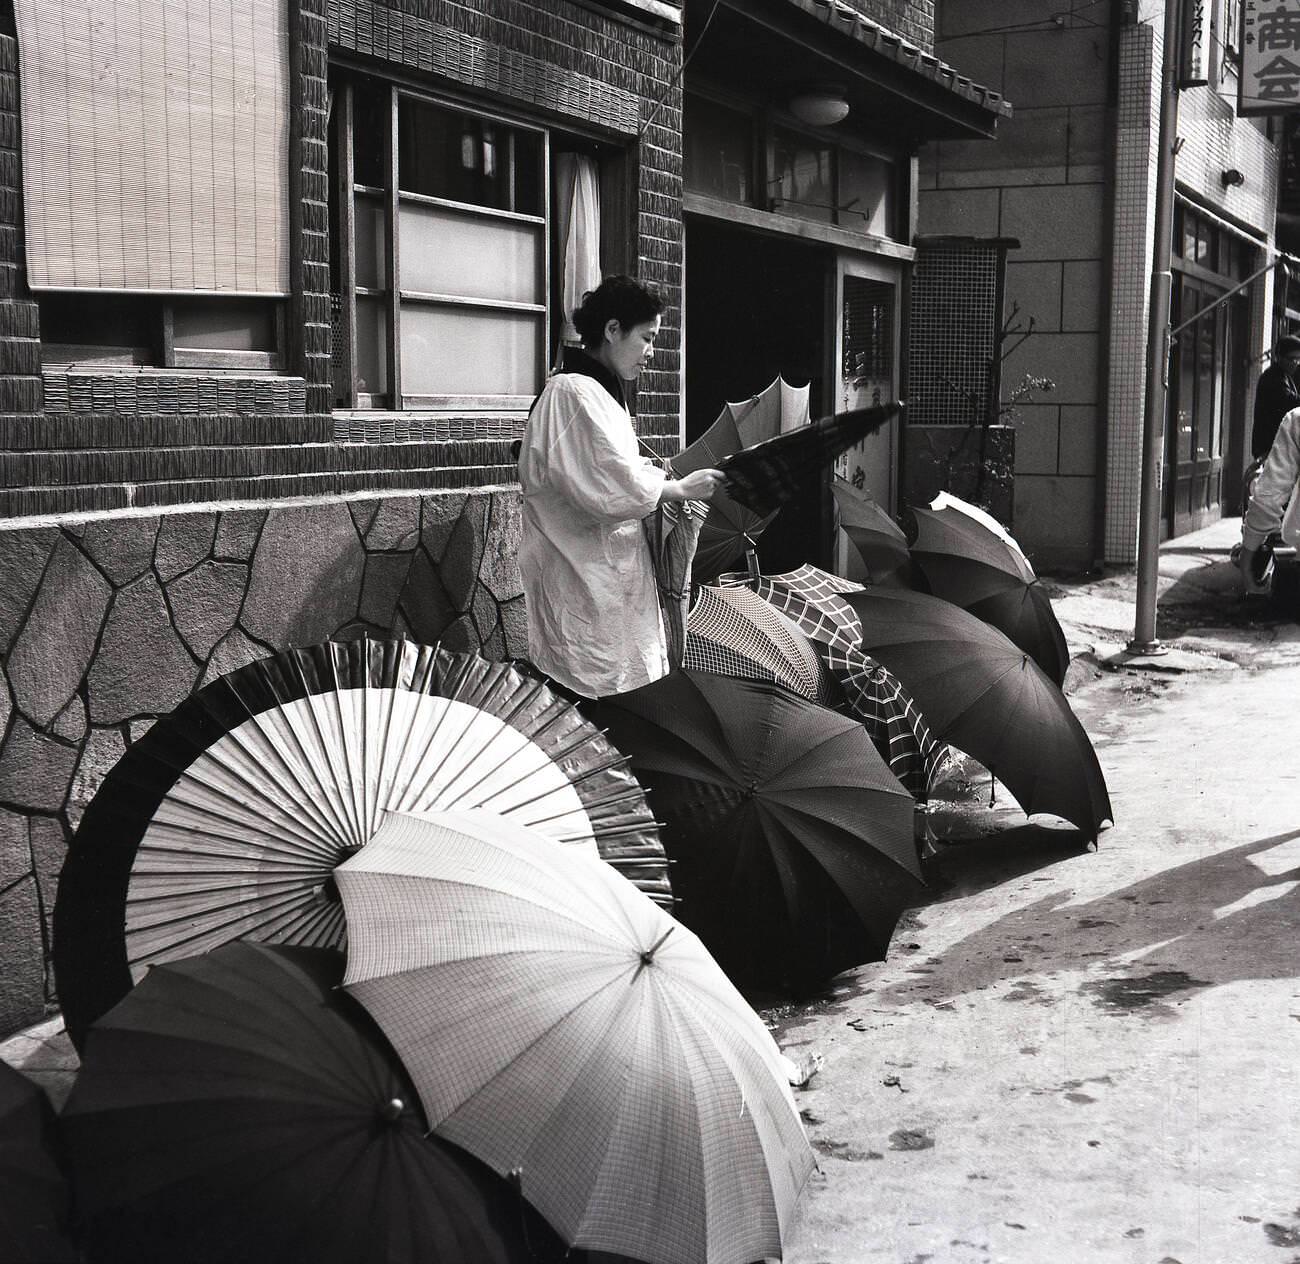 A female Japanese street trader outside a building selling umbrellas in Tokyo, 1950s.